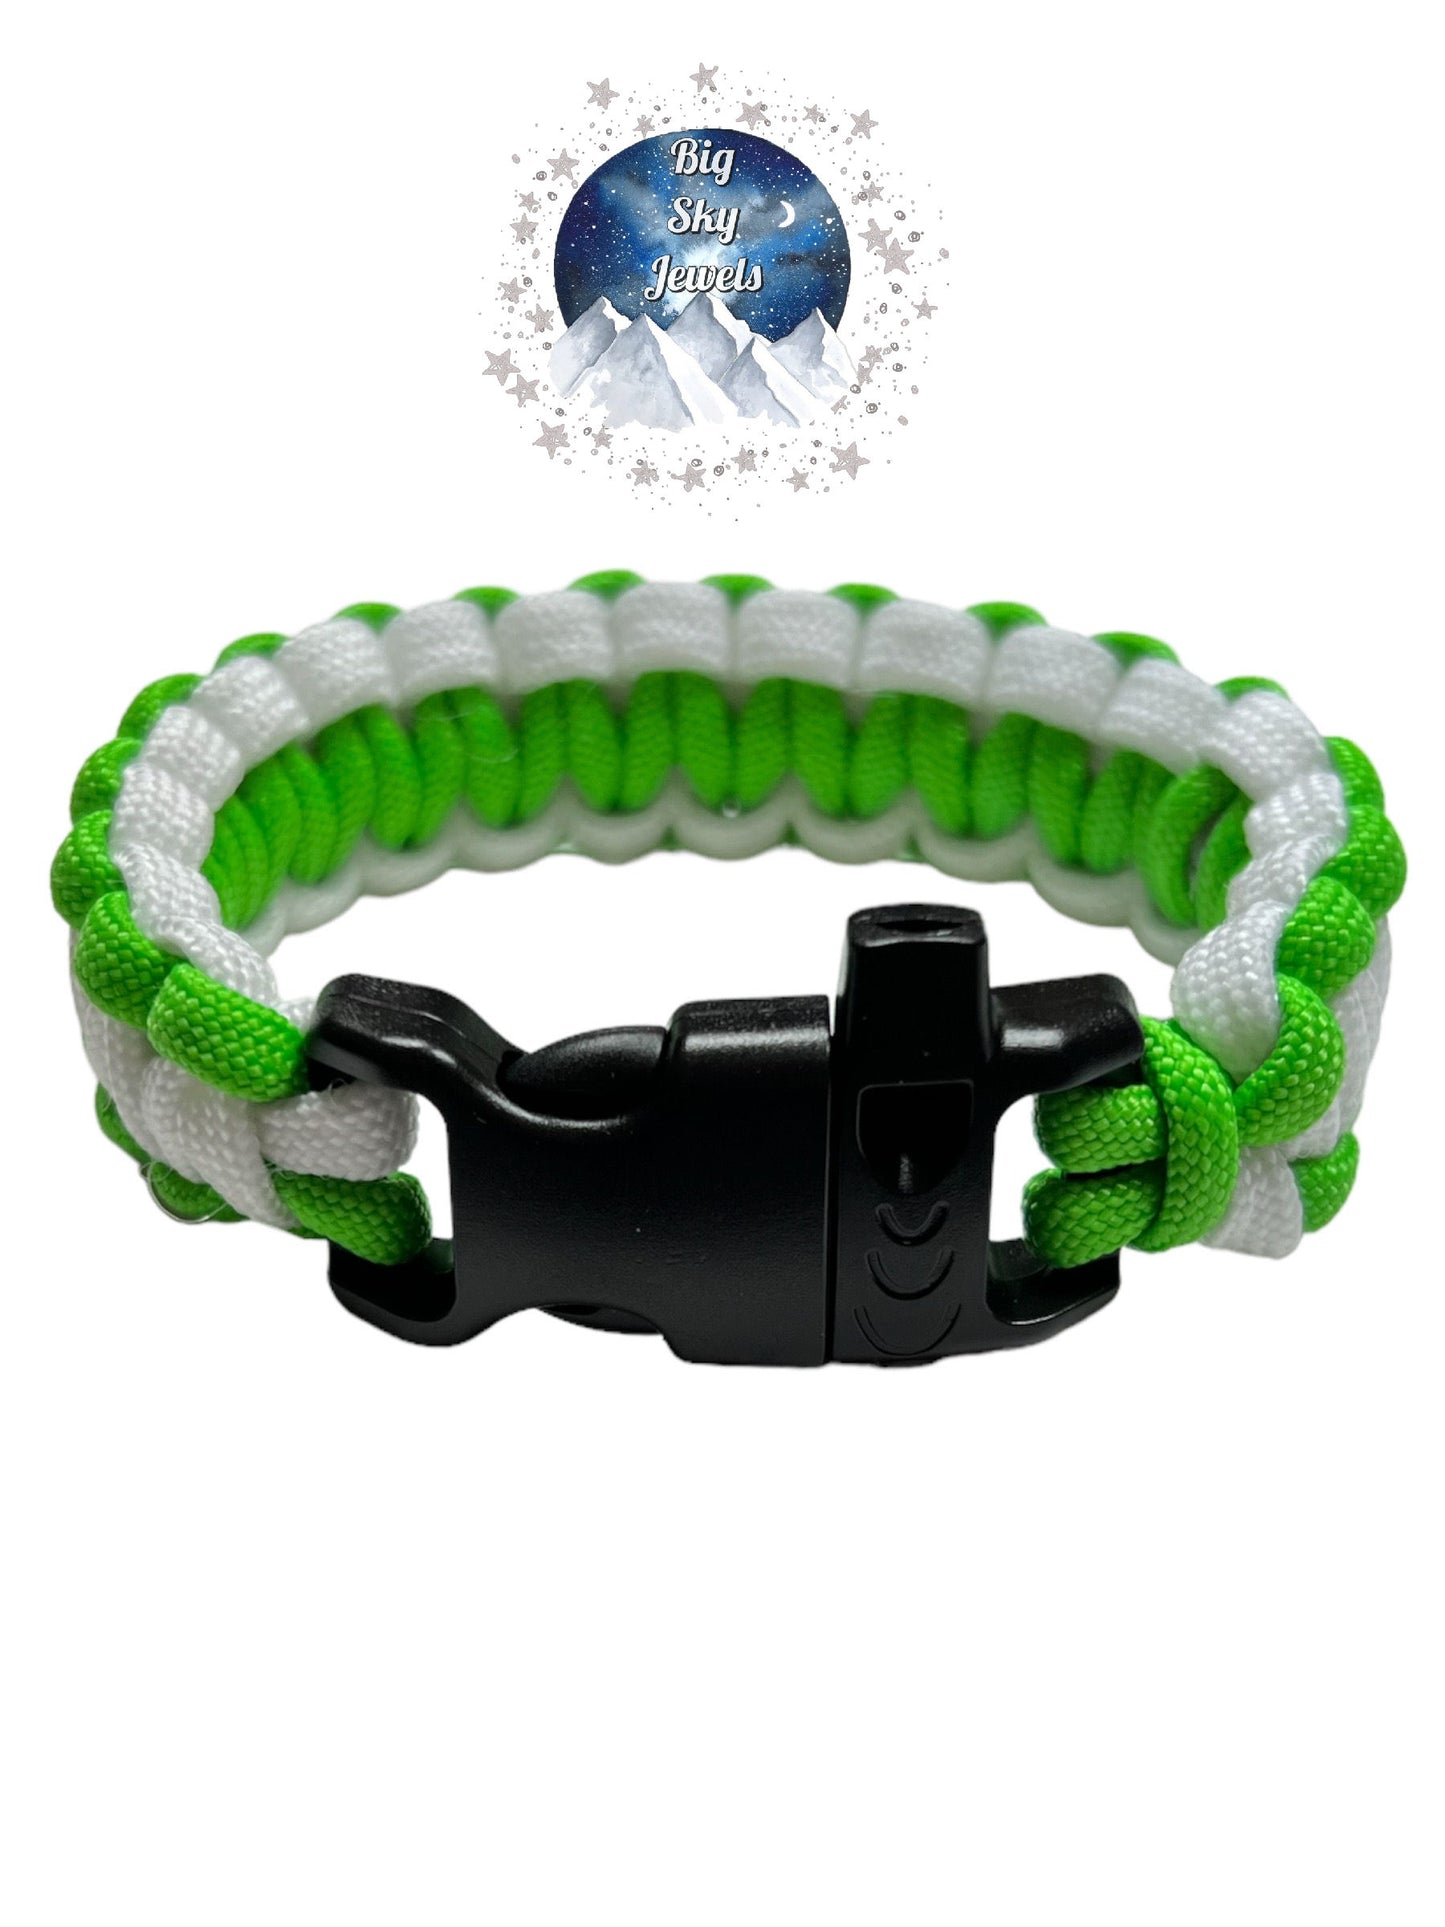 ONE 550 Paracord Whistle Bracelet Kids Adults Multiple Color Option listing Ages 3+ Hiking Camping Emergency